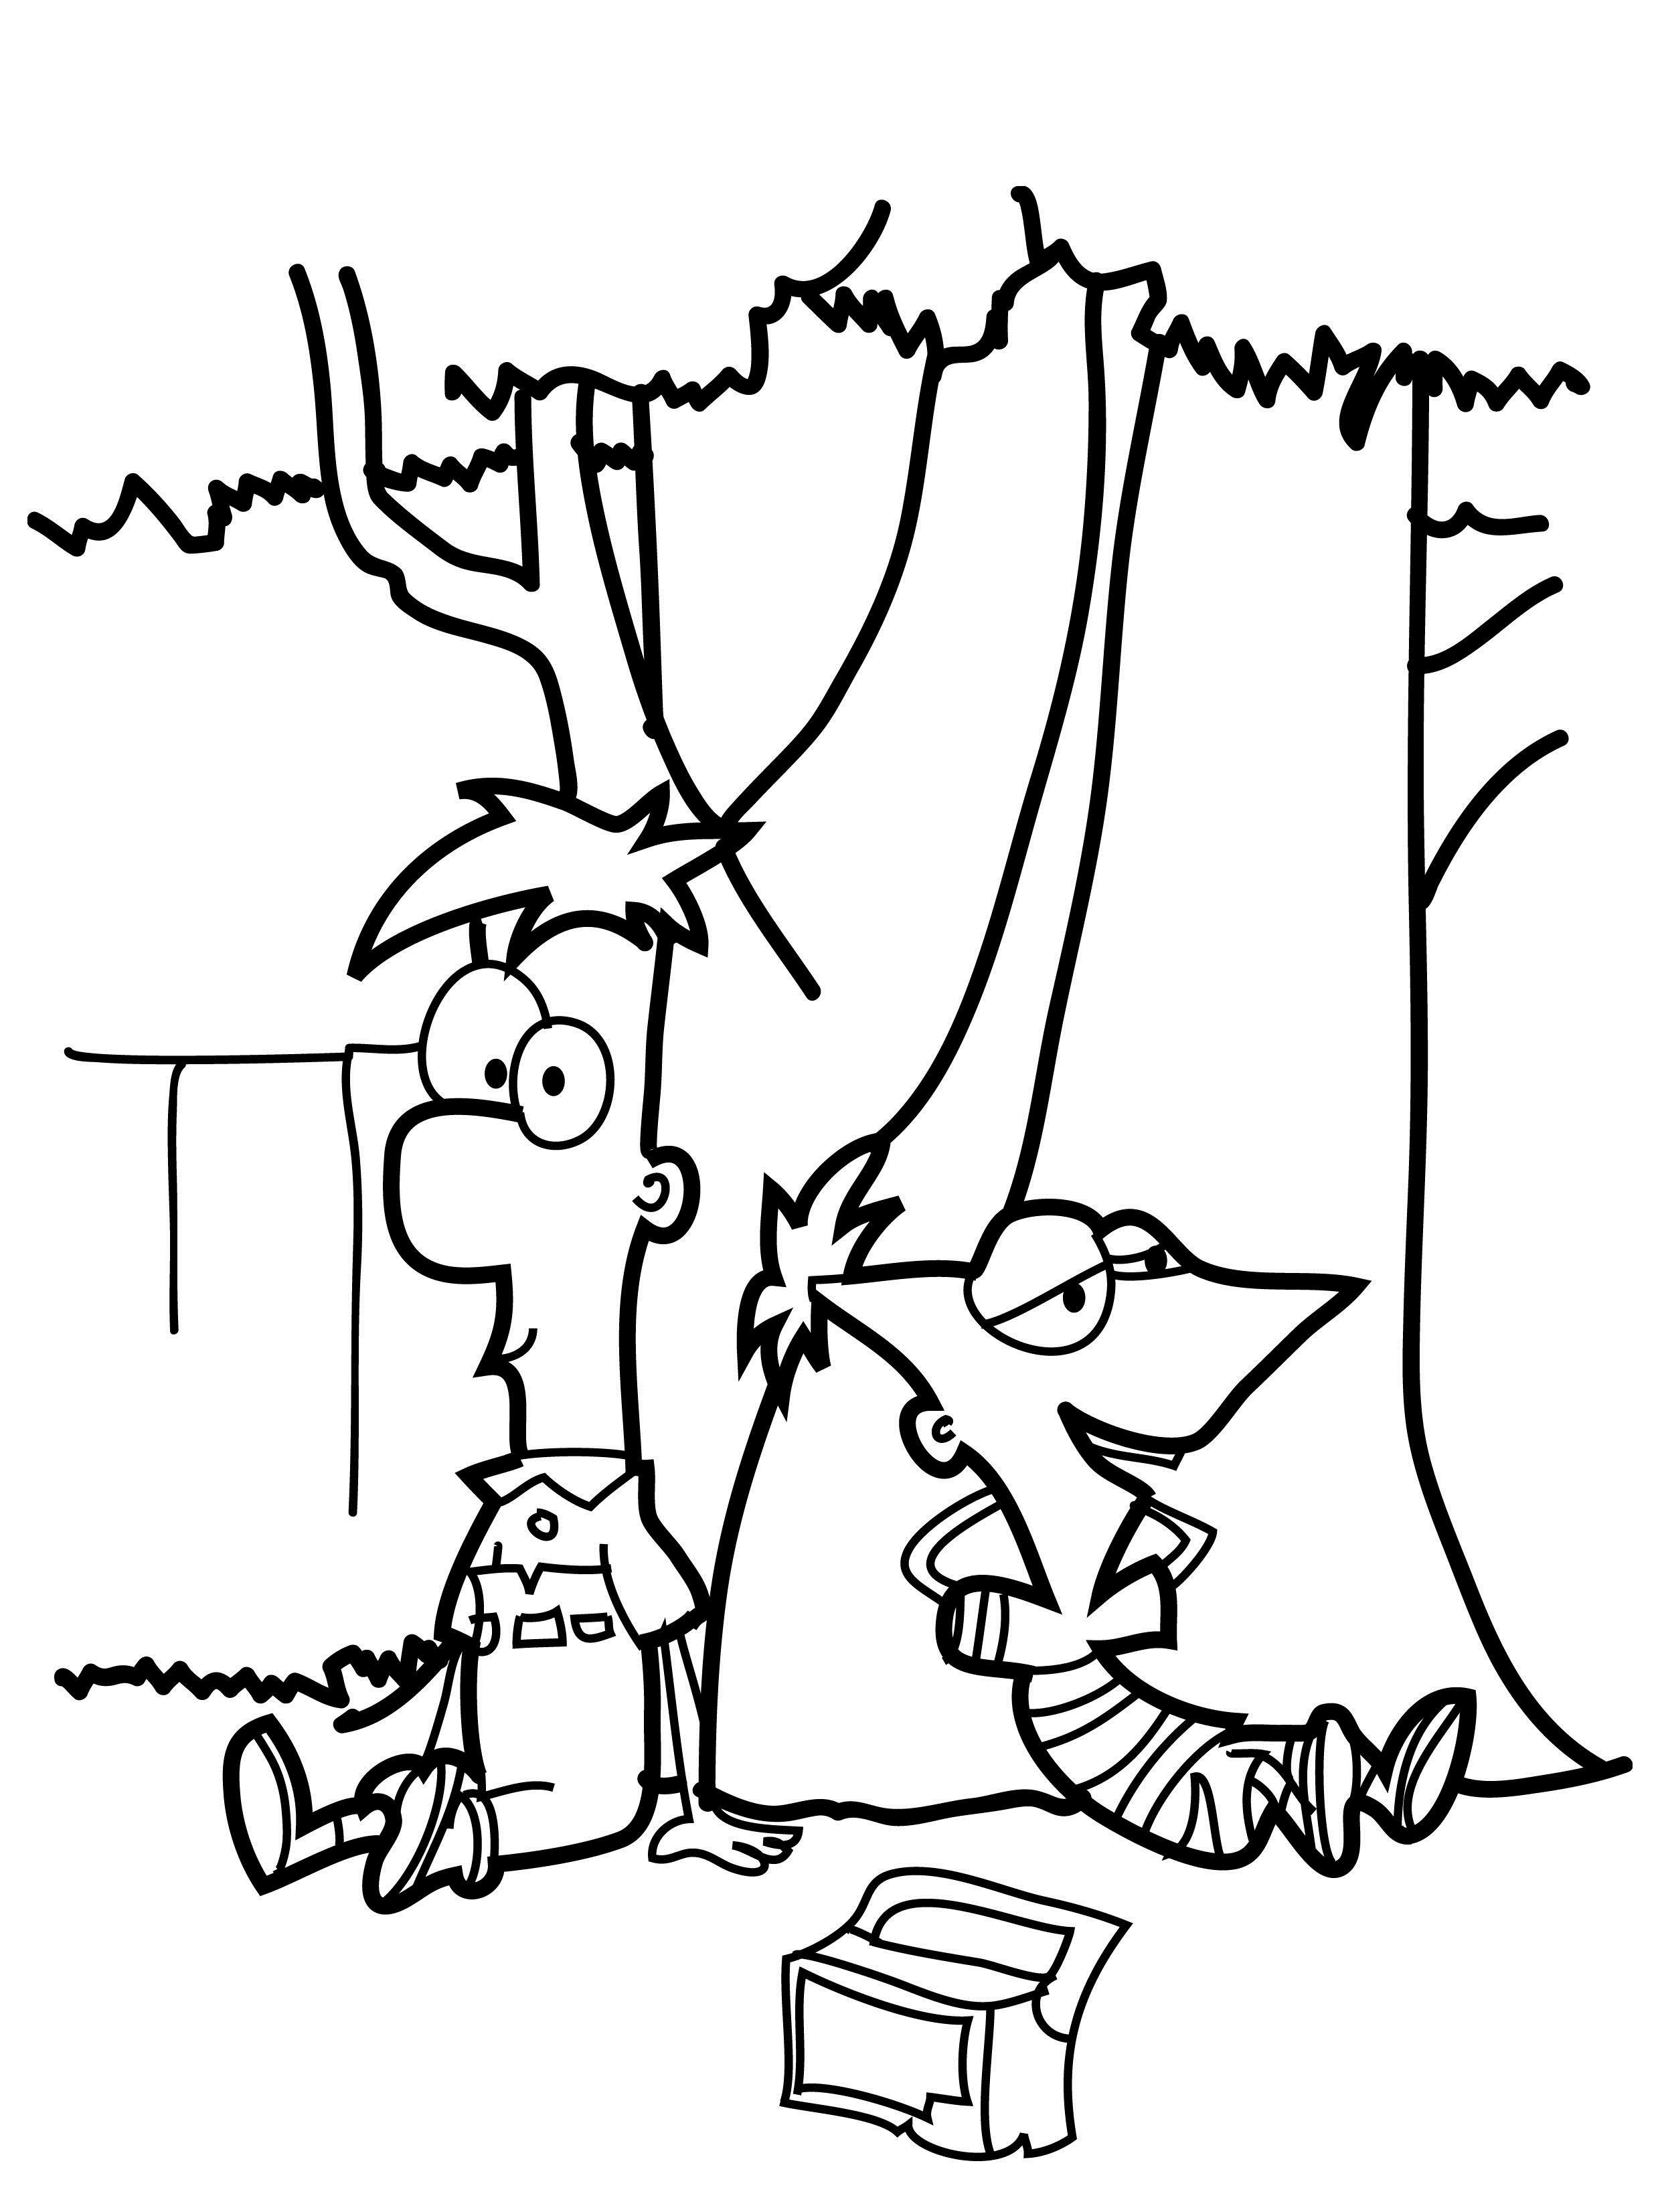 Phineas and Ferbs Pictures Coloring Page